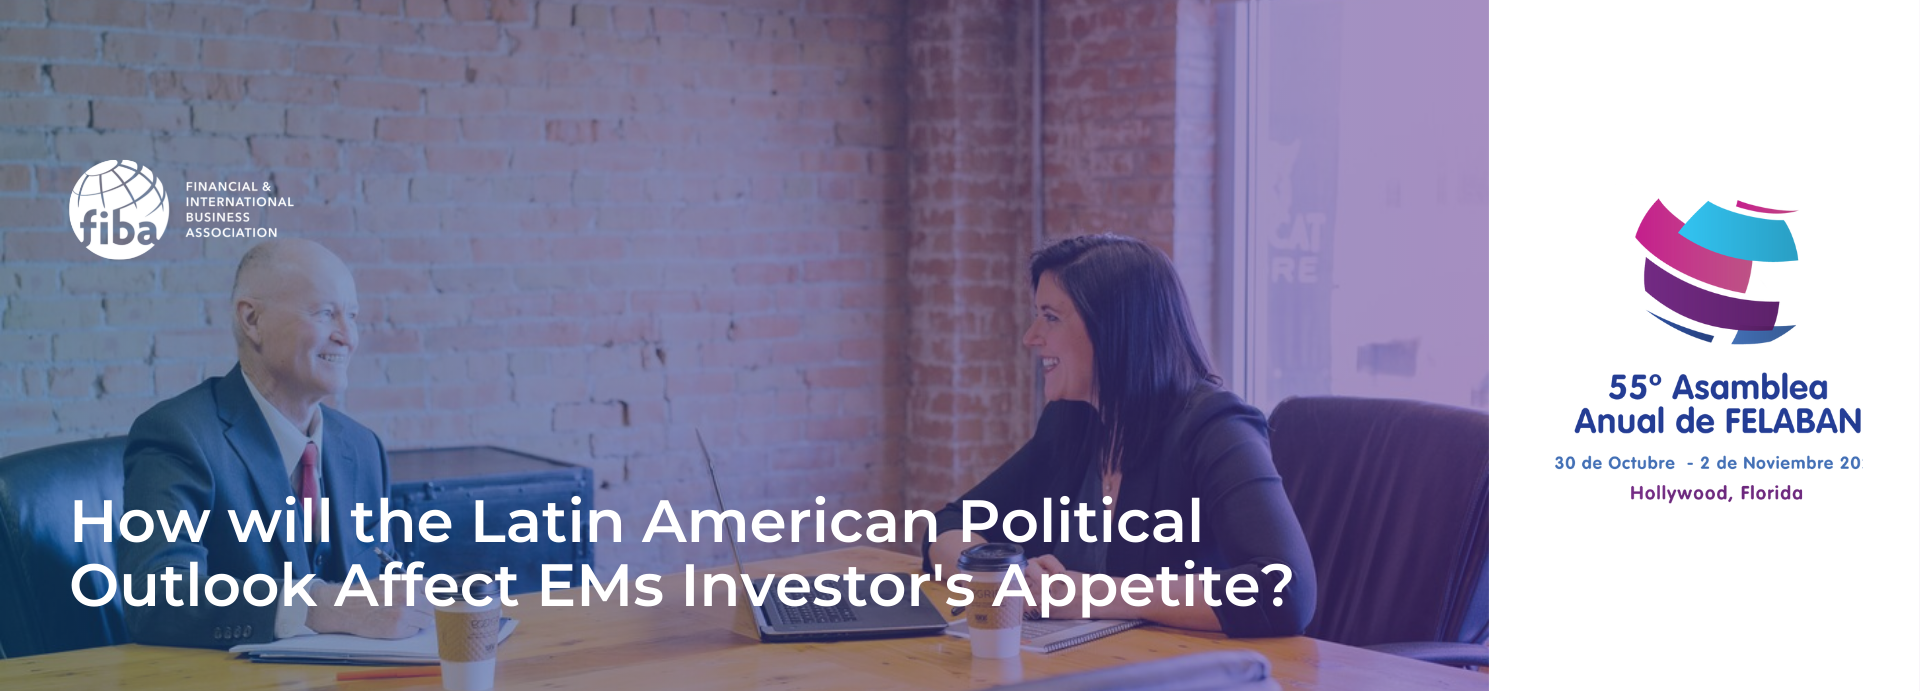 How will the Latin American Political Outlook Affect EMs Investor’s Appetite?